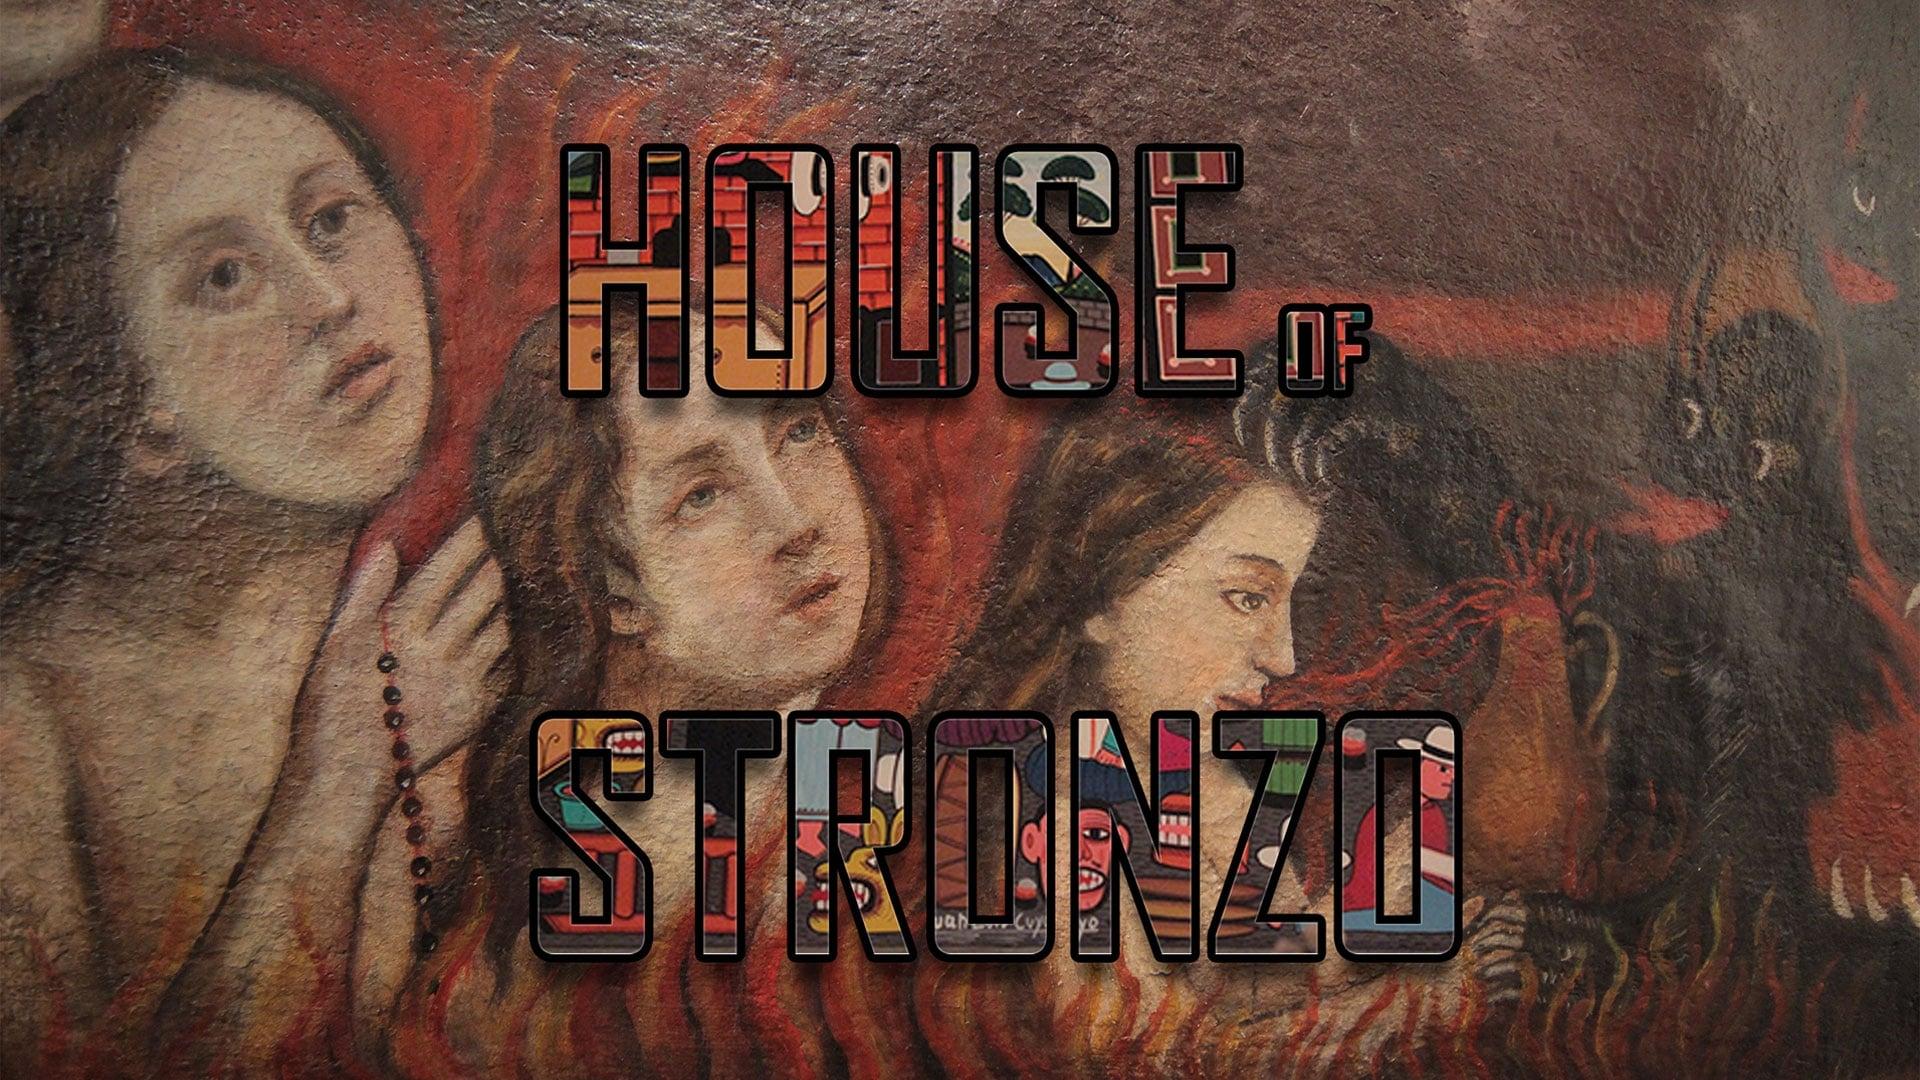 House of Stronzo backdrop